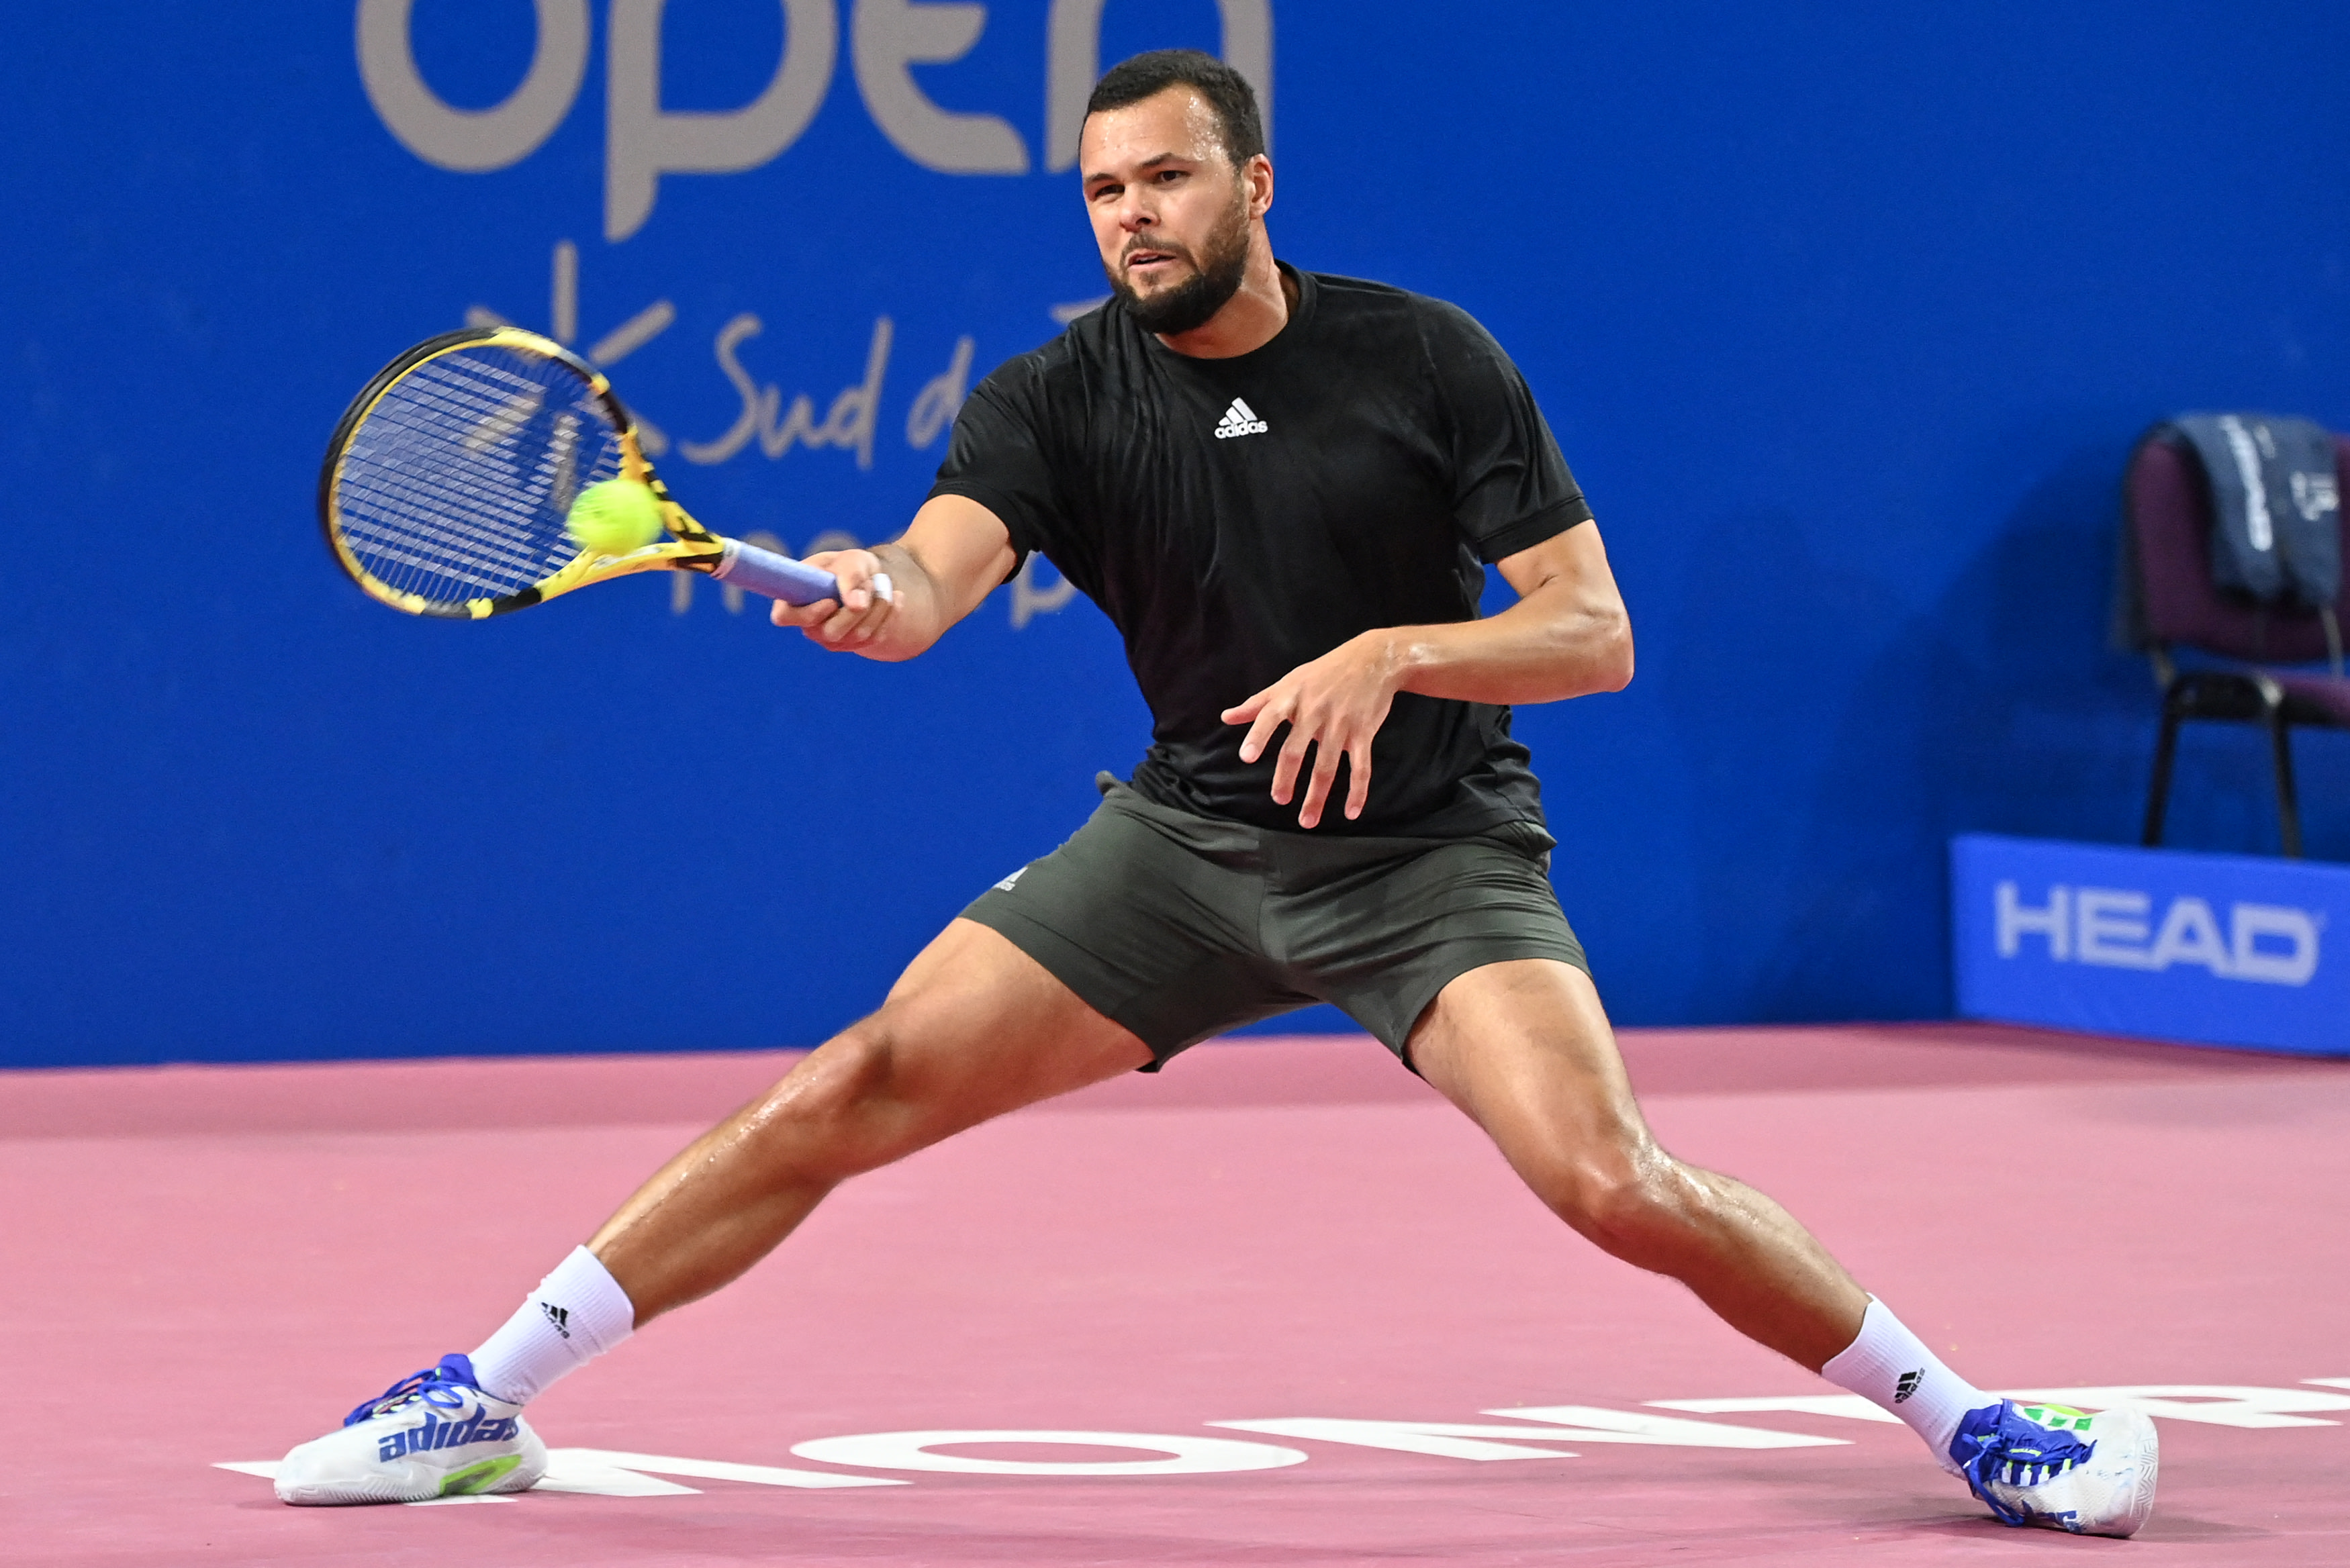 Sizzling Shots: Jo-Wilfried Tsonga makes it in his home